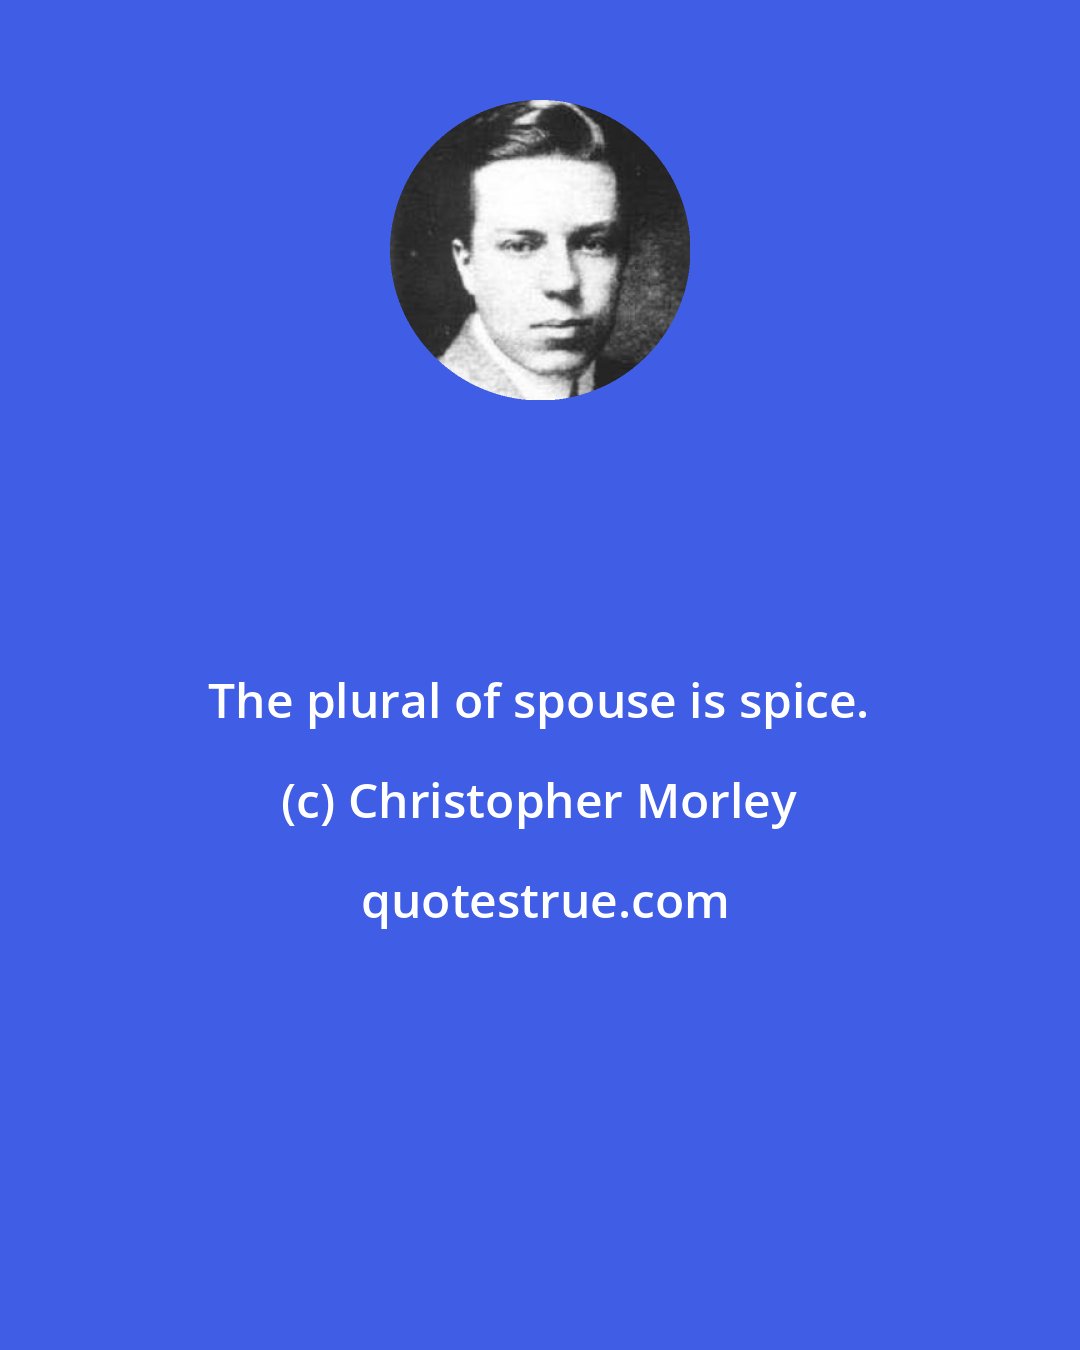 Christopher Morley: The plural of spouse is spice.